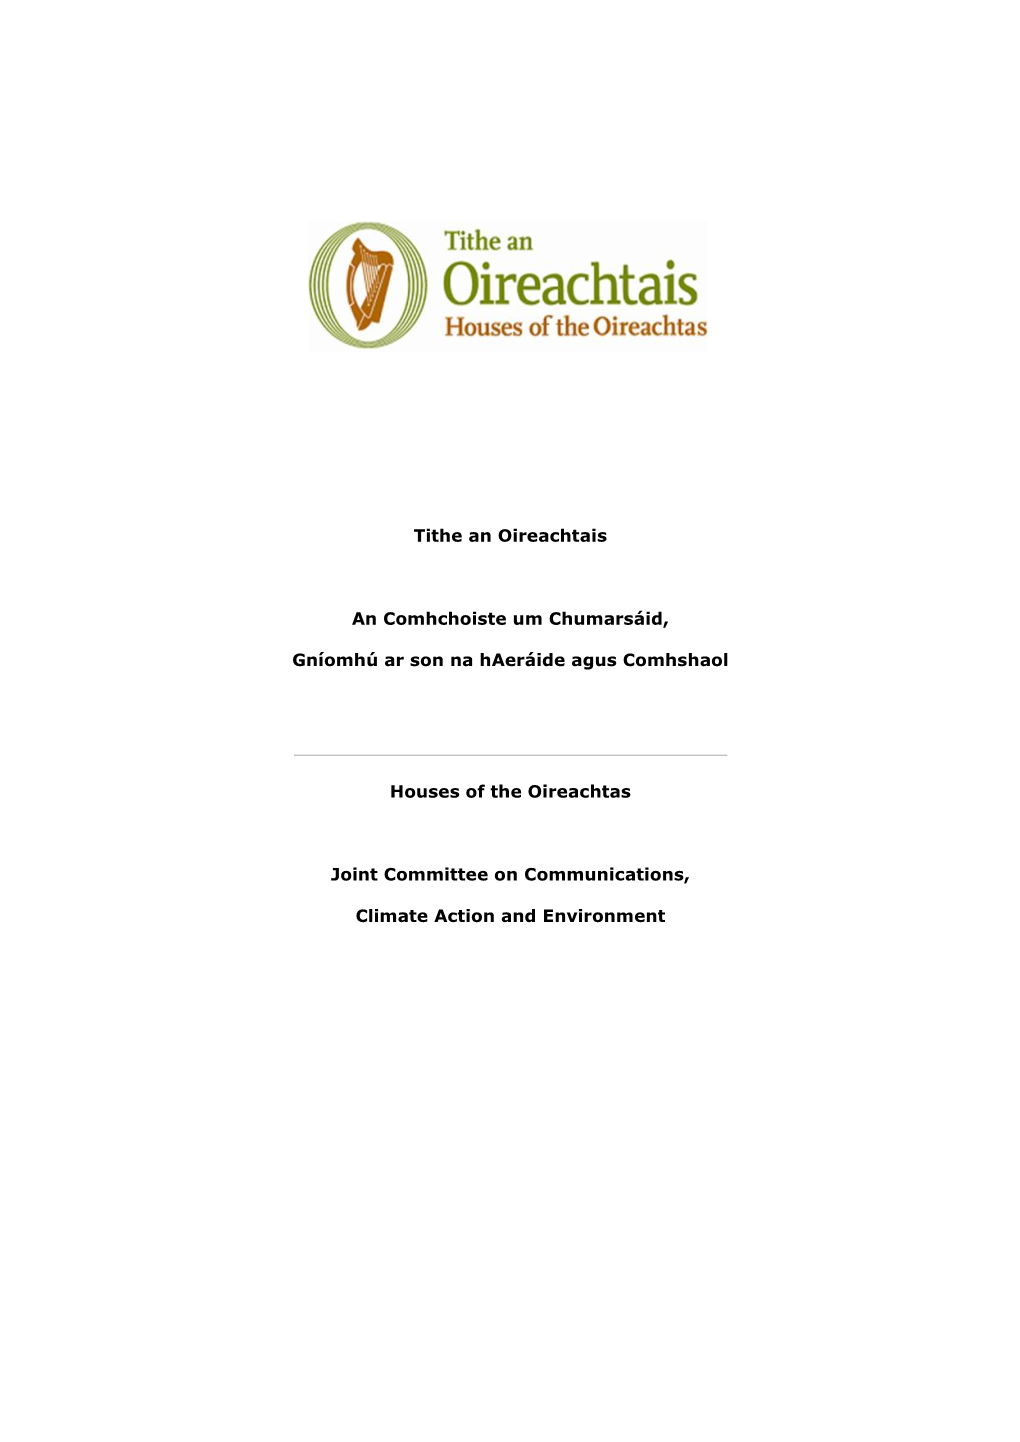 Submission on the Public Consultation on the Regulation of Online Political Advertising in Ireland